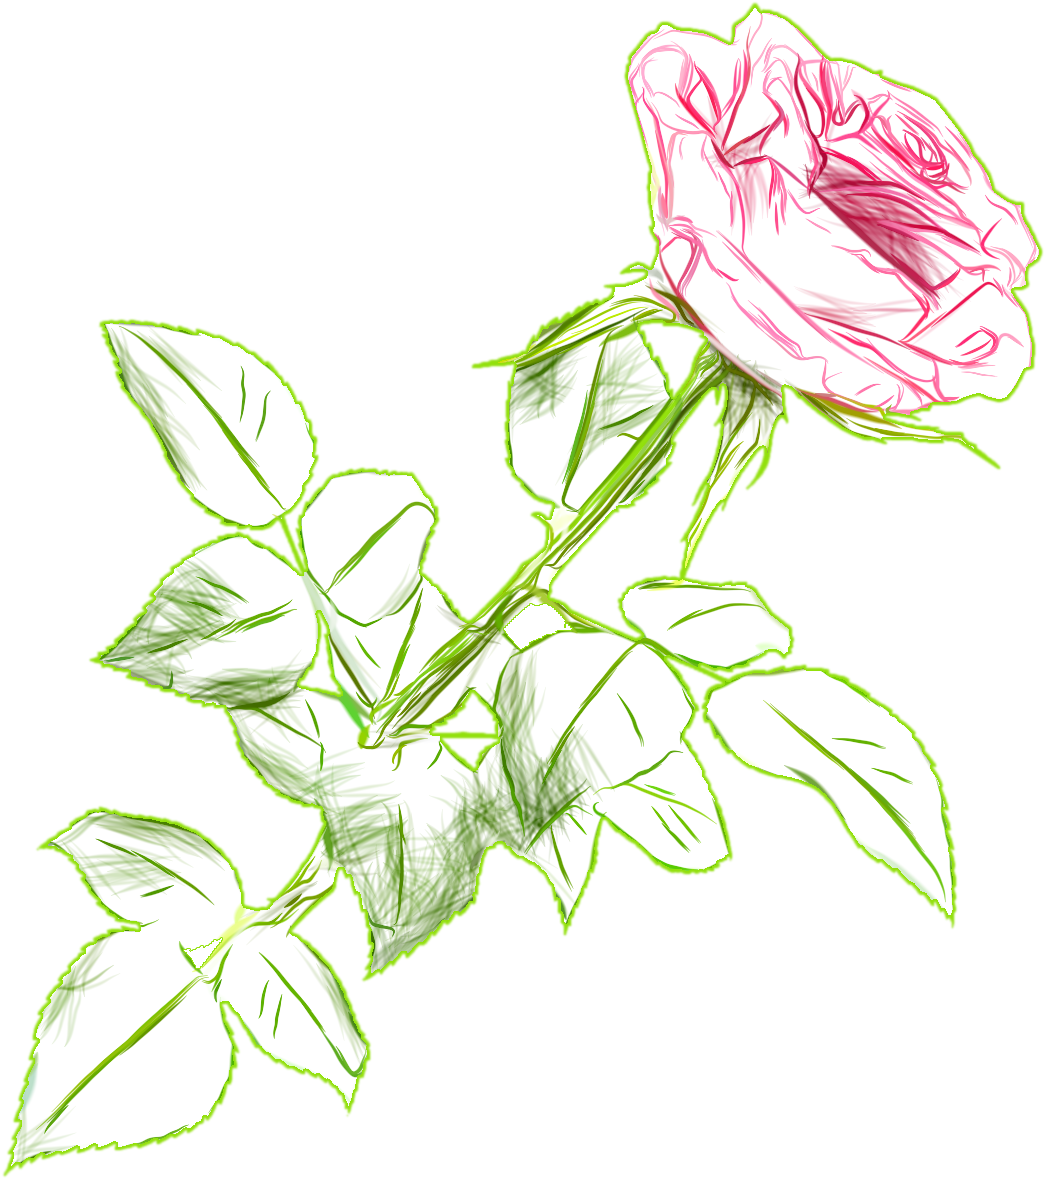 A Drawing Of A Rose